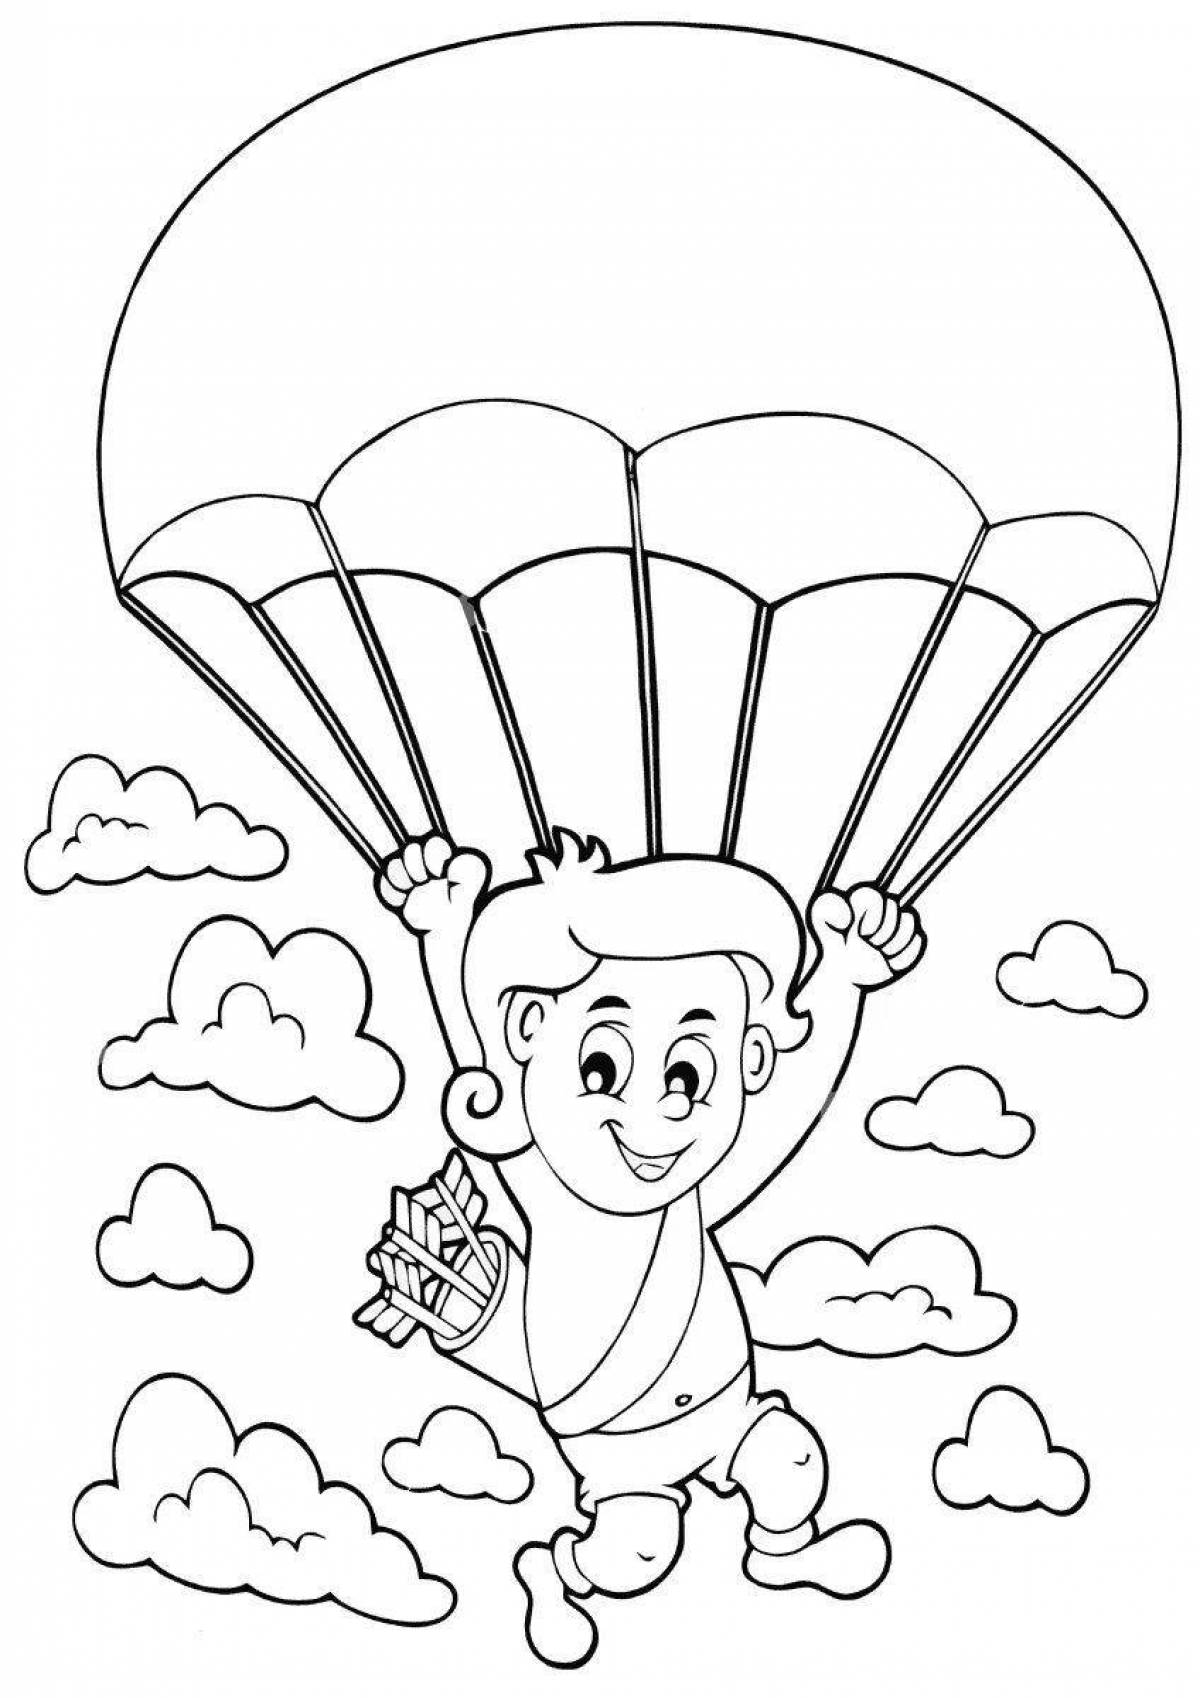 Military parachutist coloring book for kids